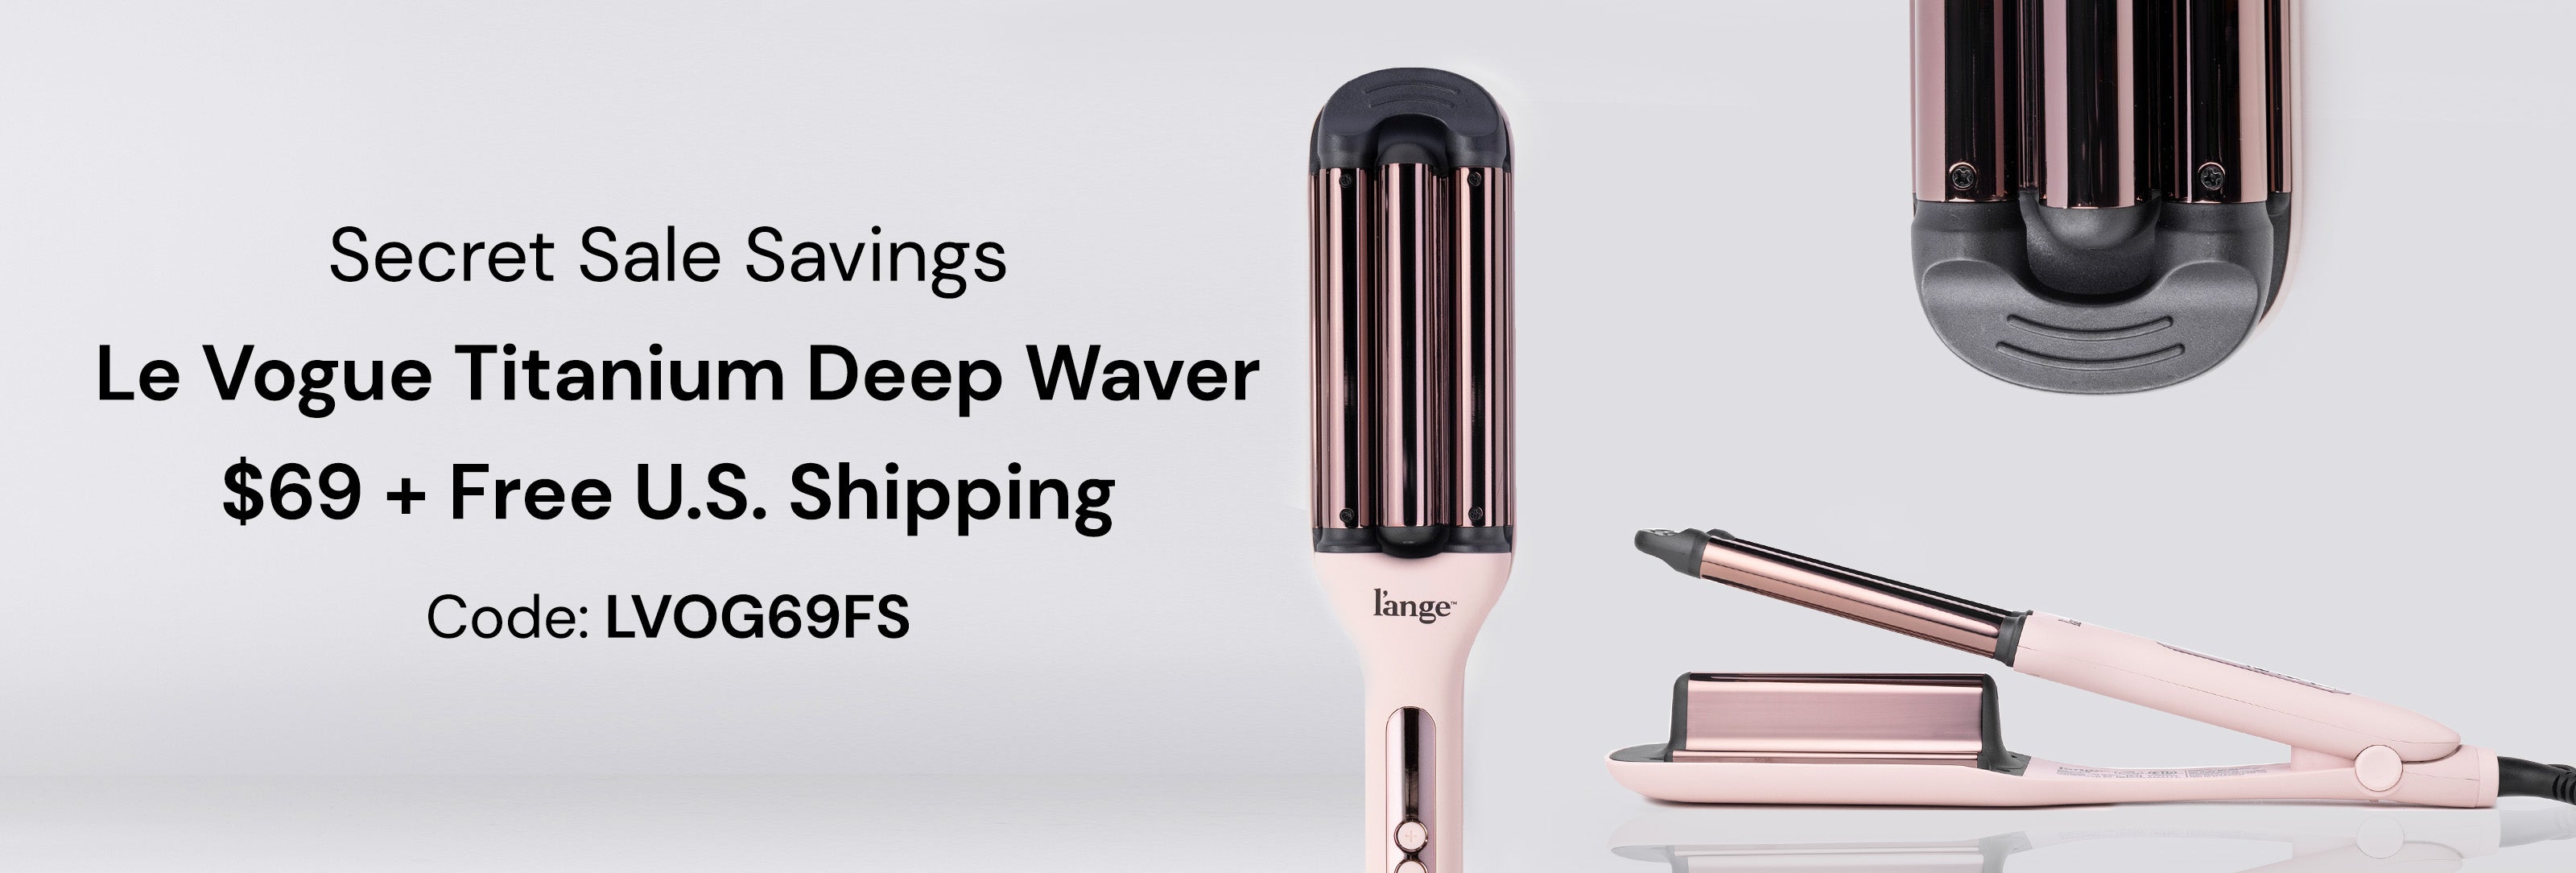 Le Vogue Titanium Deep Waver $69 + FREE U.S. Shipping Code: LVOG69FS *Free shipping to contiguous U.S. only.